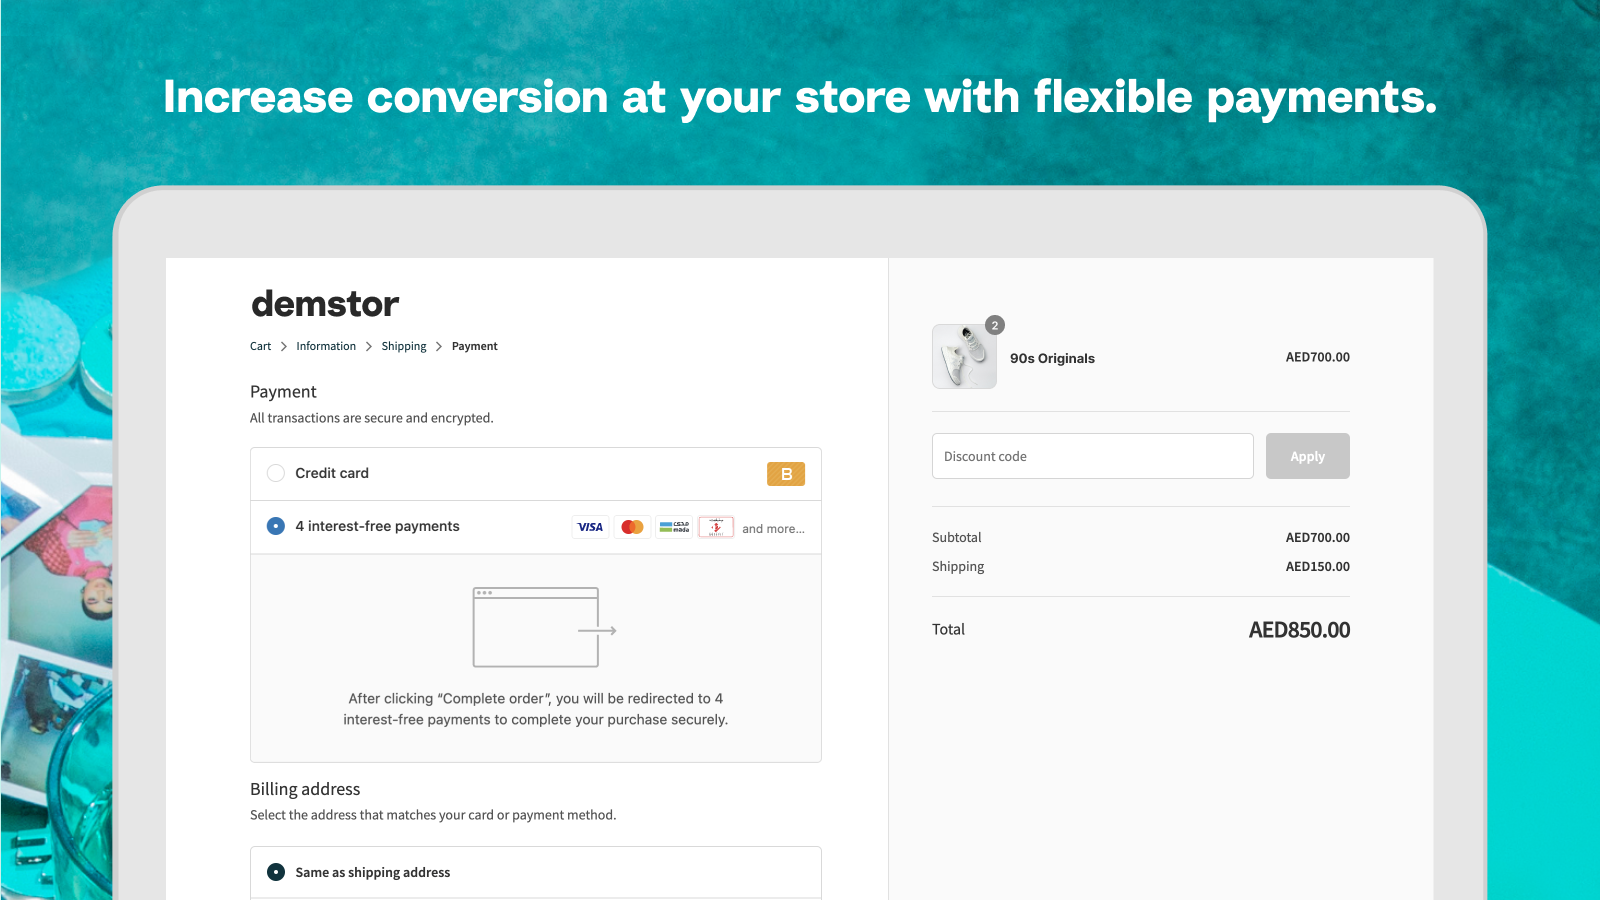 Increase conversion at your store with flexible payments.